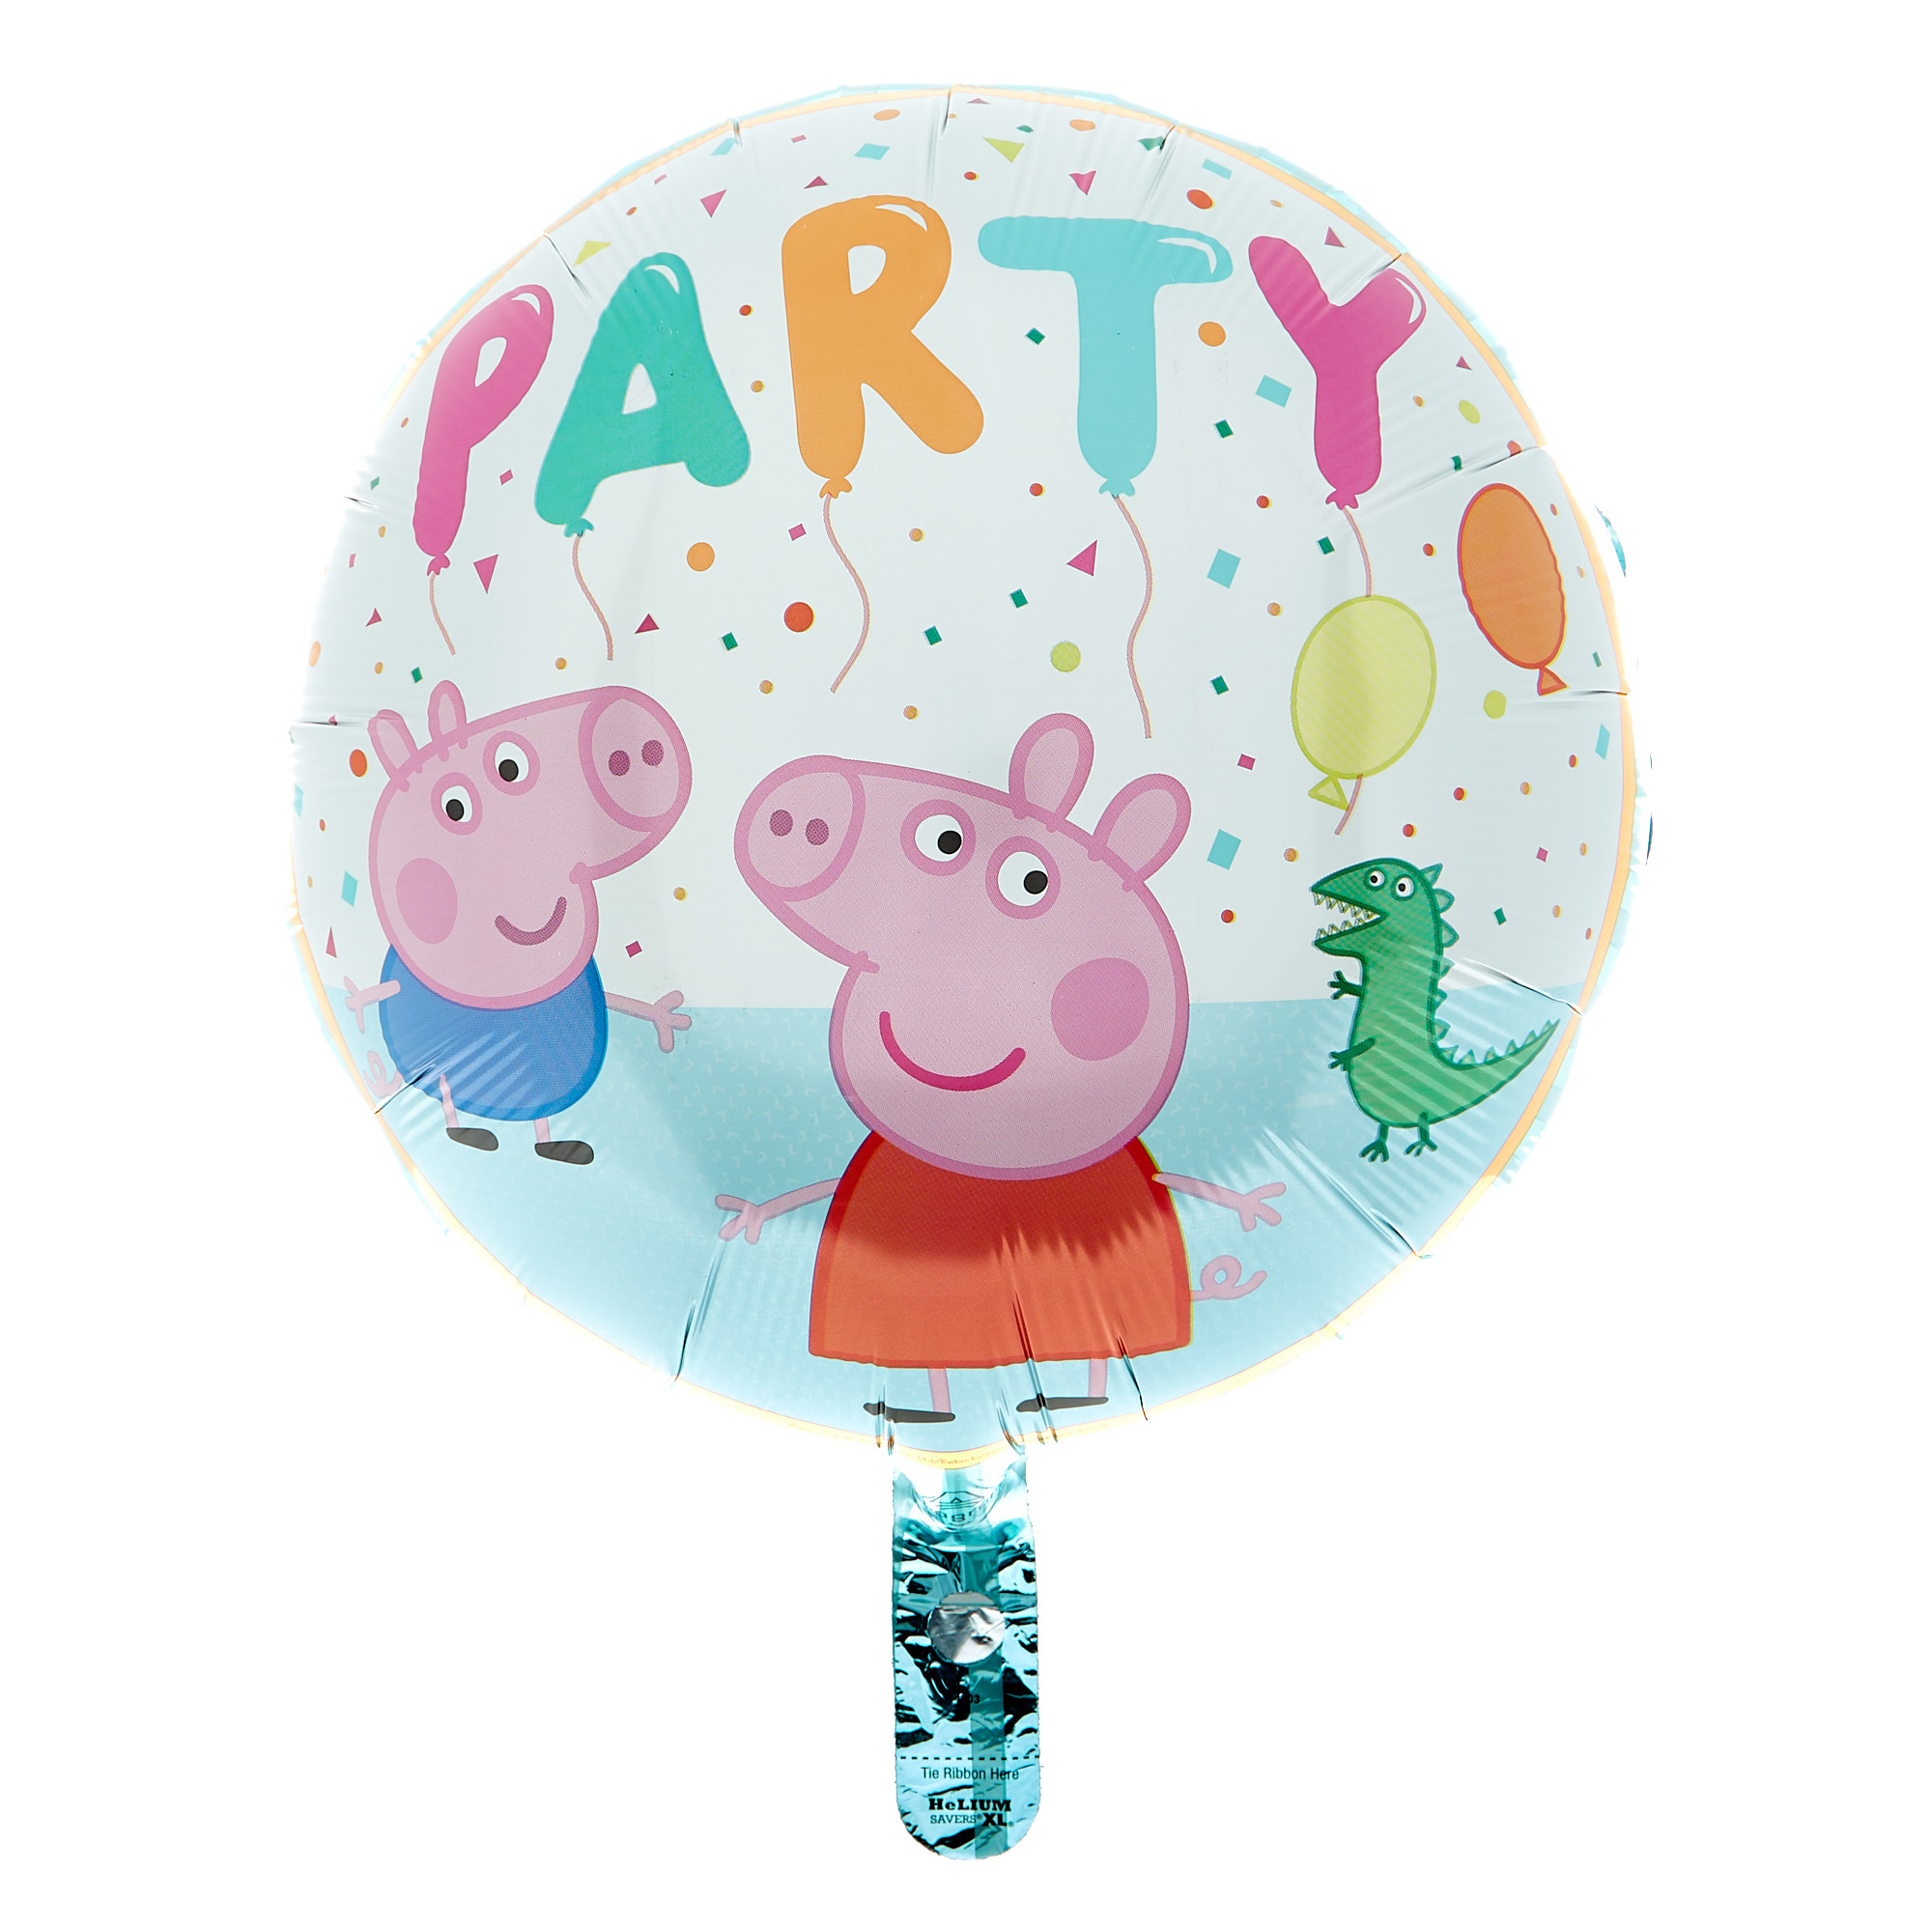 Buy 17-Inch Peppa Pig Round Foil Helium Balloon for GBP 3.99